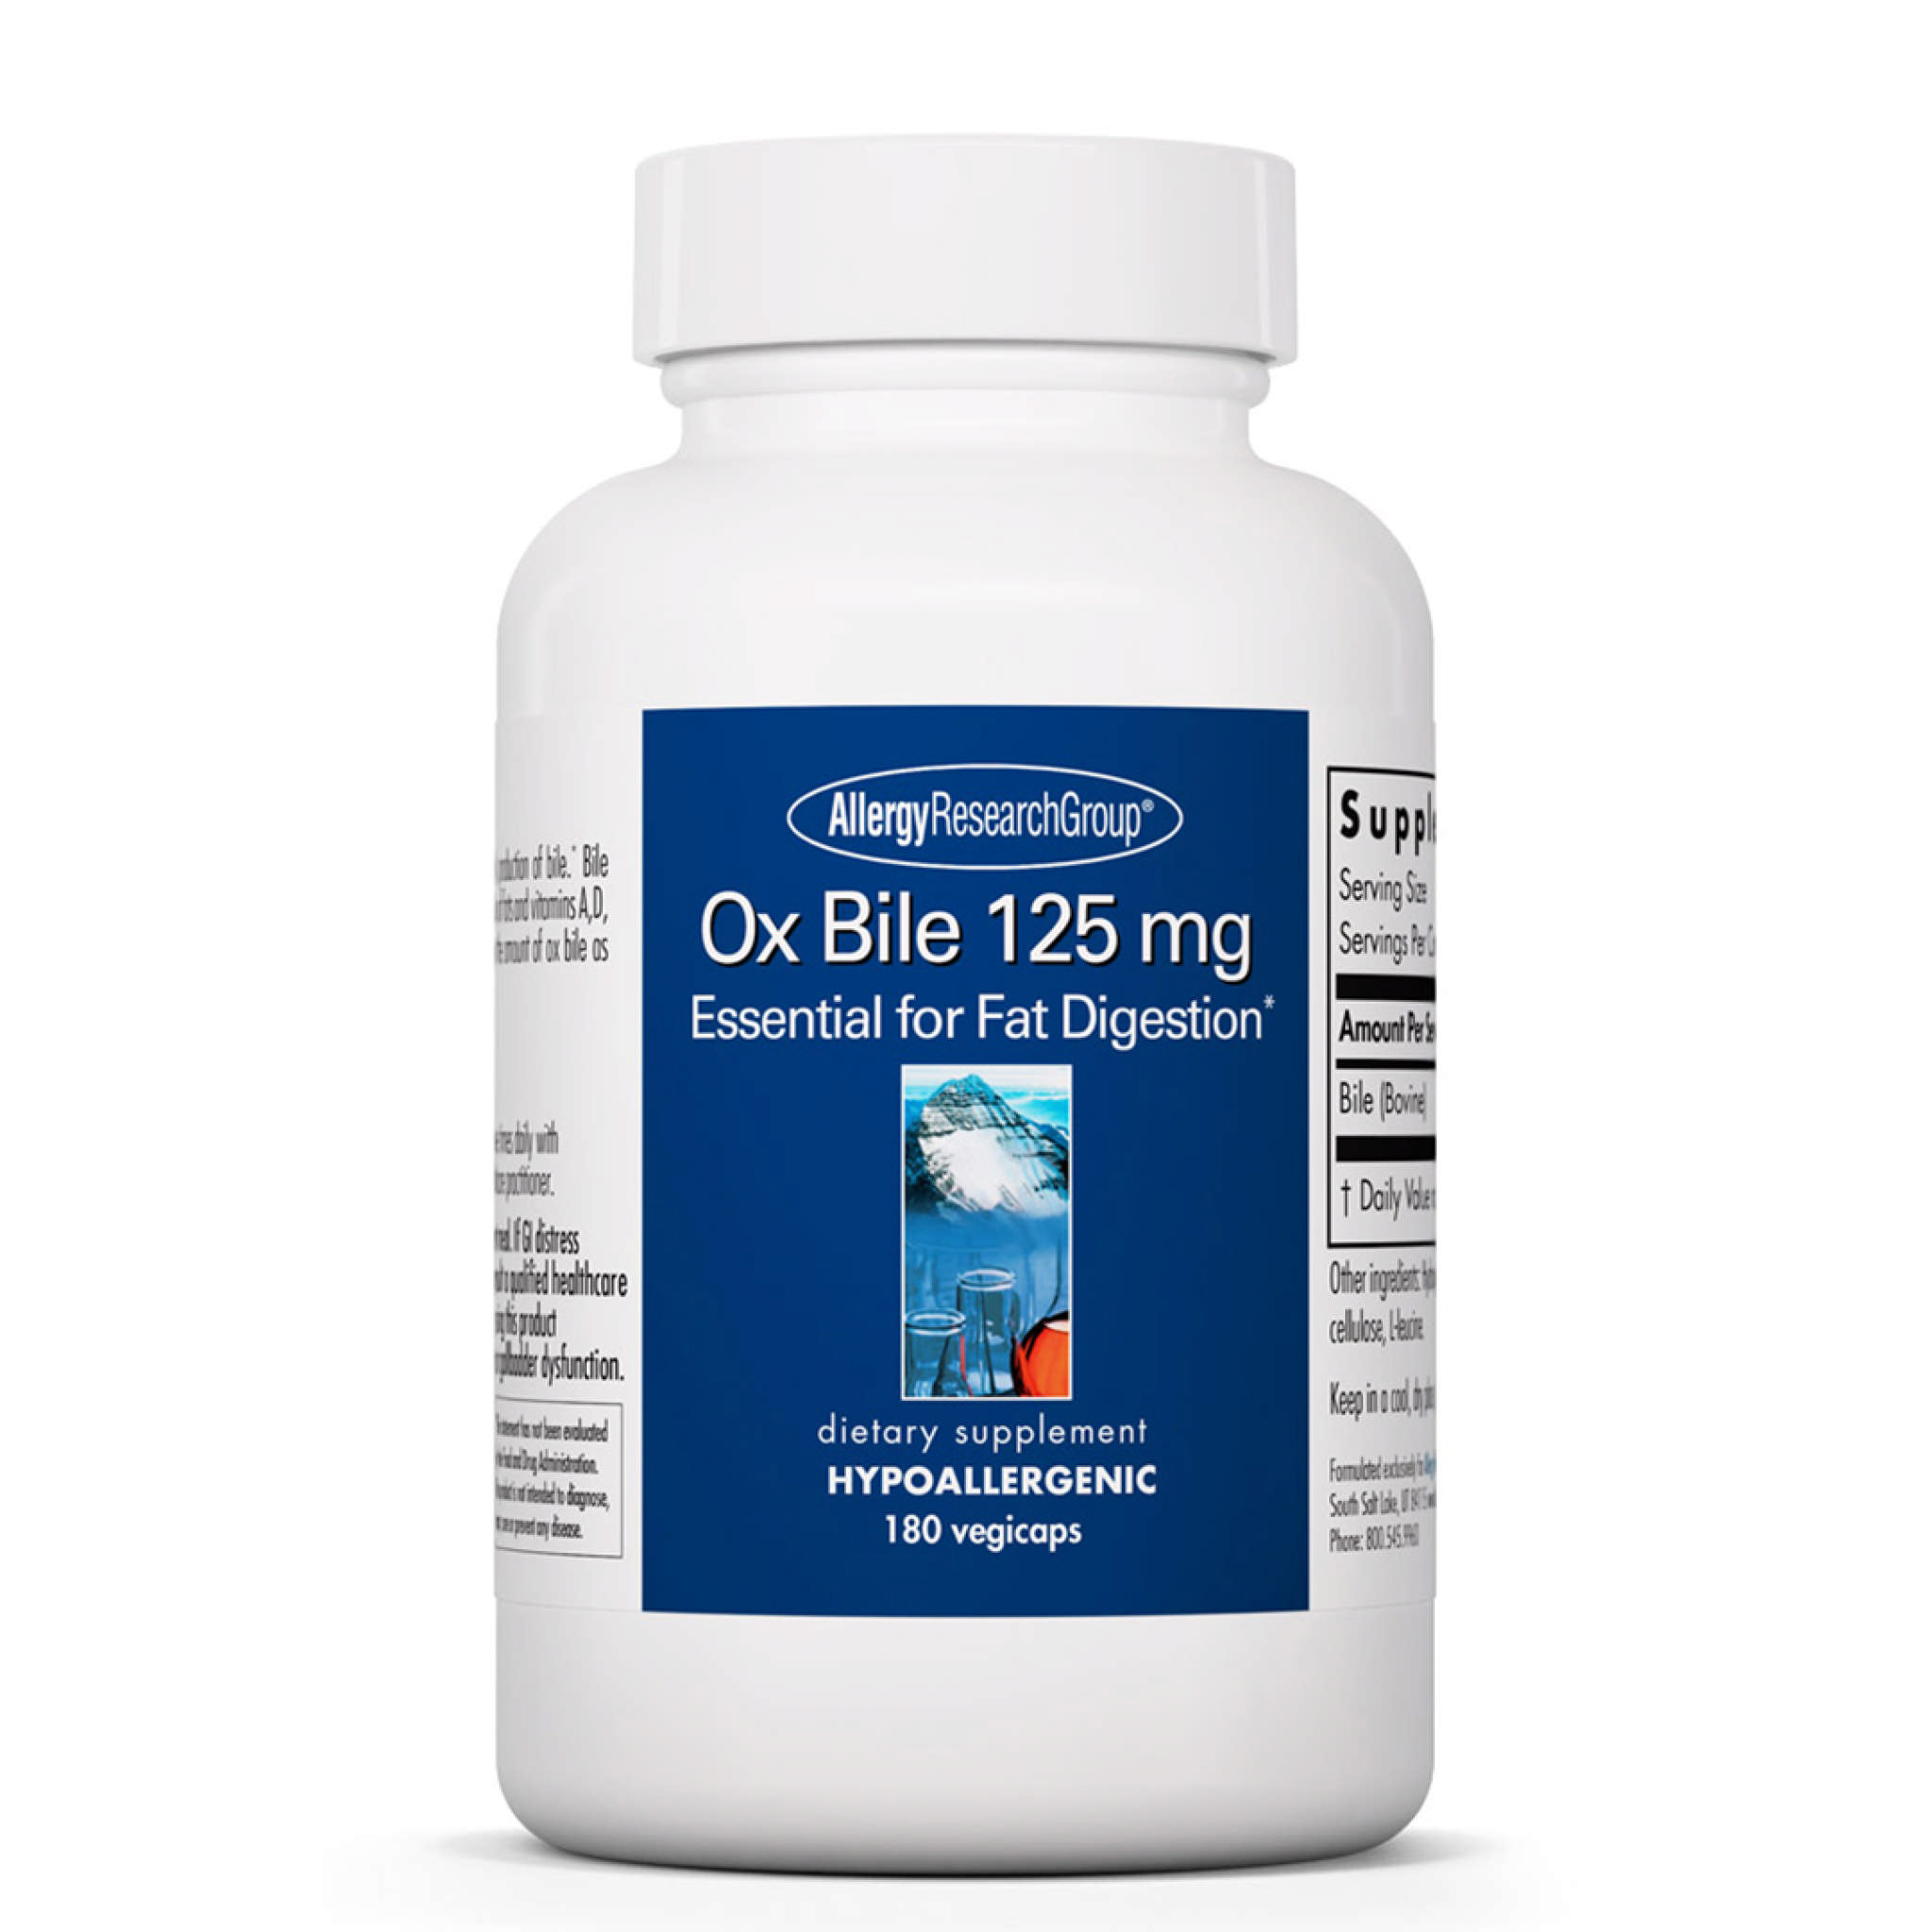 Allergy Research Group - Ox Bile 125 mg